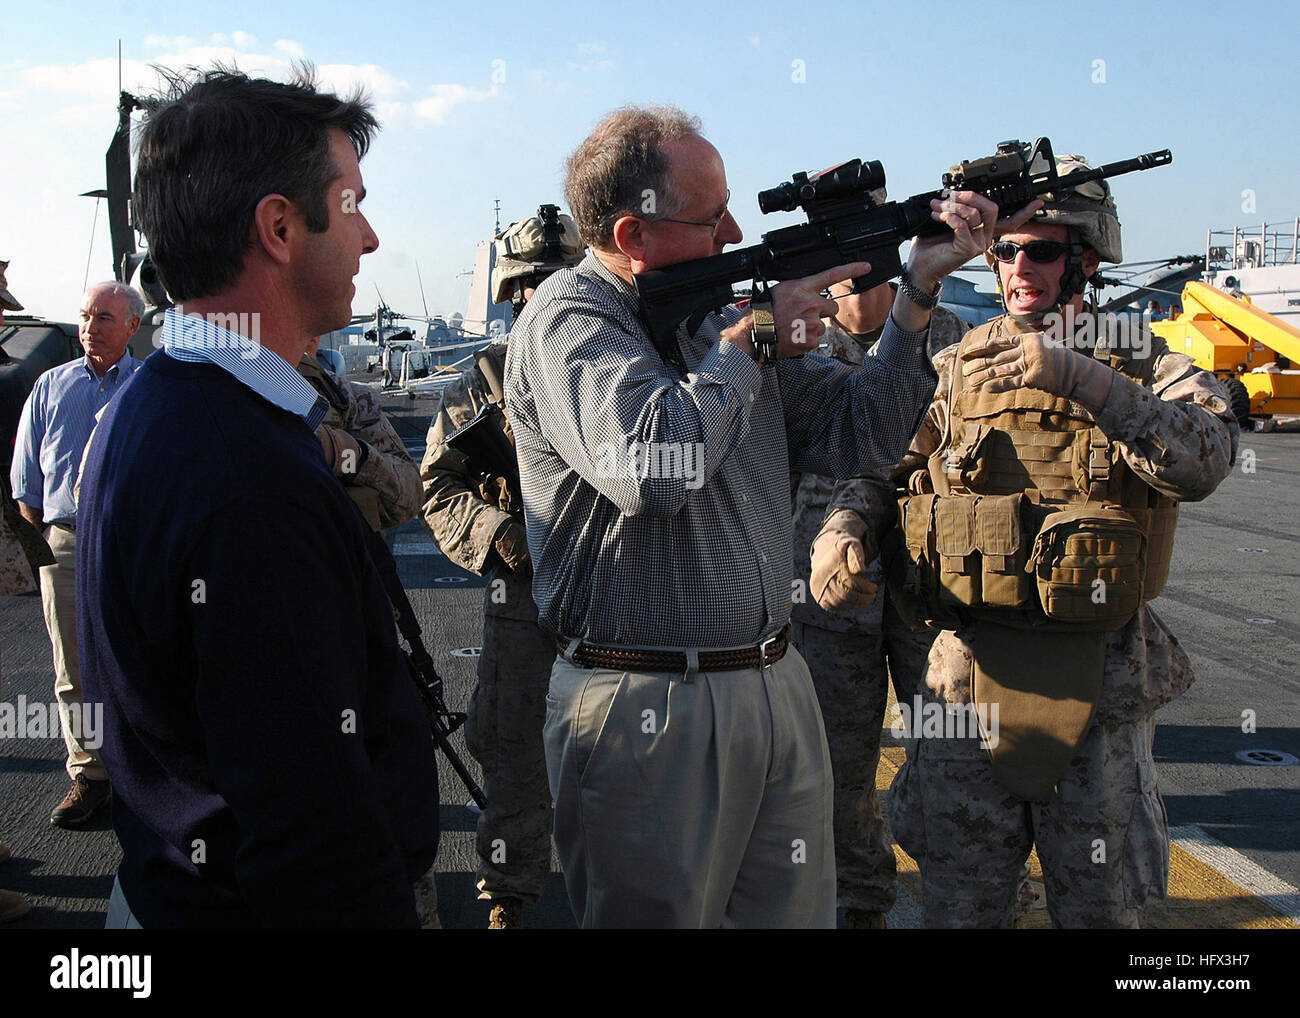 081219-N-5681S-074 BAHRAIN (Dec. 19, 2008) Marines demonstrate weapons to U.S. Reps. Rob Whitman, left, and Mike Conaway aboard the multi-purpose amphibious assault ship USS Iwo Jima (LHD 7). The congressmen are aboard the ship as part of a congressional delegation. U.S. Navy photo by Mass Communication Specialist 2nd Class Michael Starkey (Released) US Navy 081219-N-5681S-074 Marines demonstrate weapons to U.S. Reps. Rob Whitman, left, and Mike Conaway aboard the multi-purpose amphibious assault ship USS Iwo Jima (LHD 7) Stock Photo